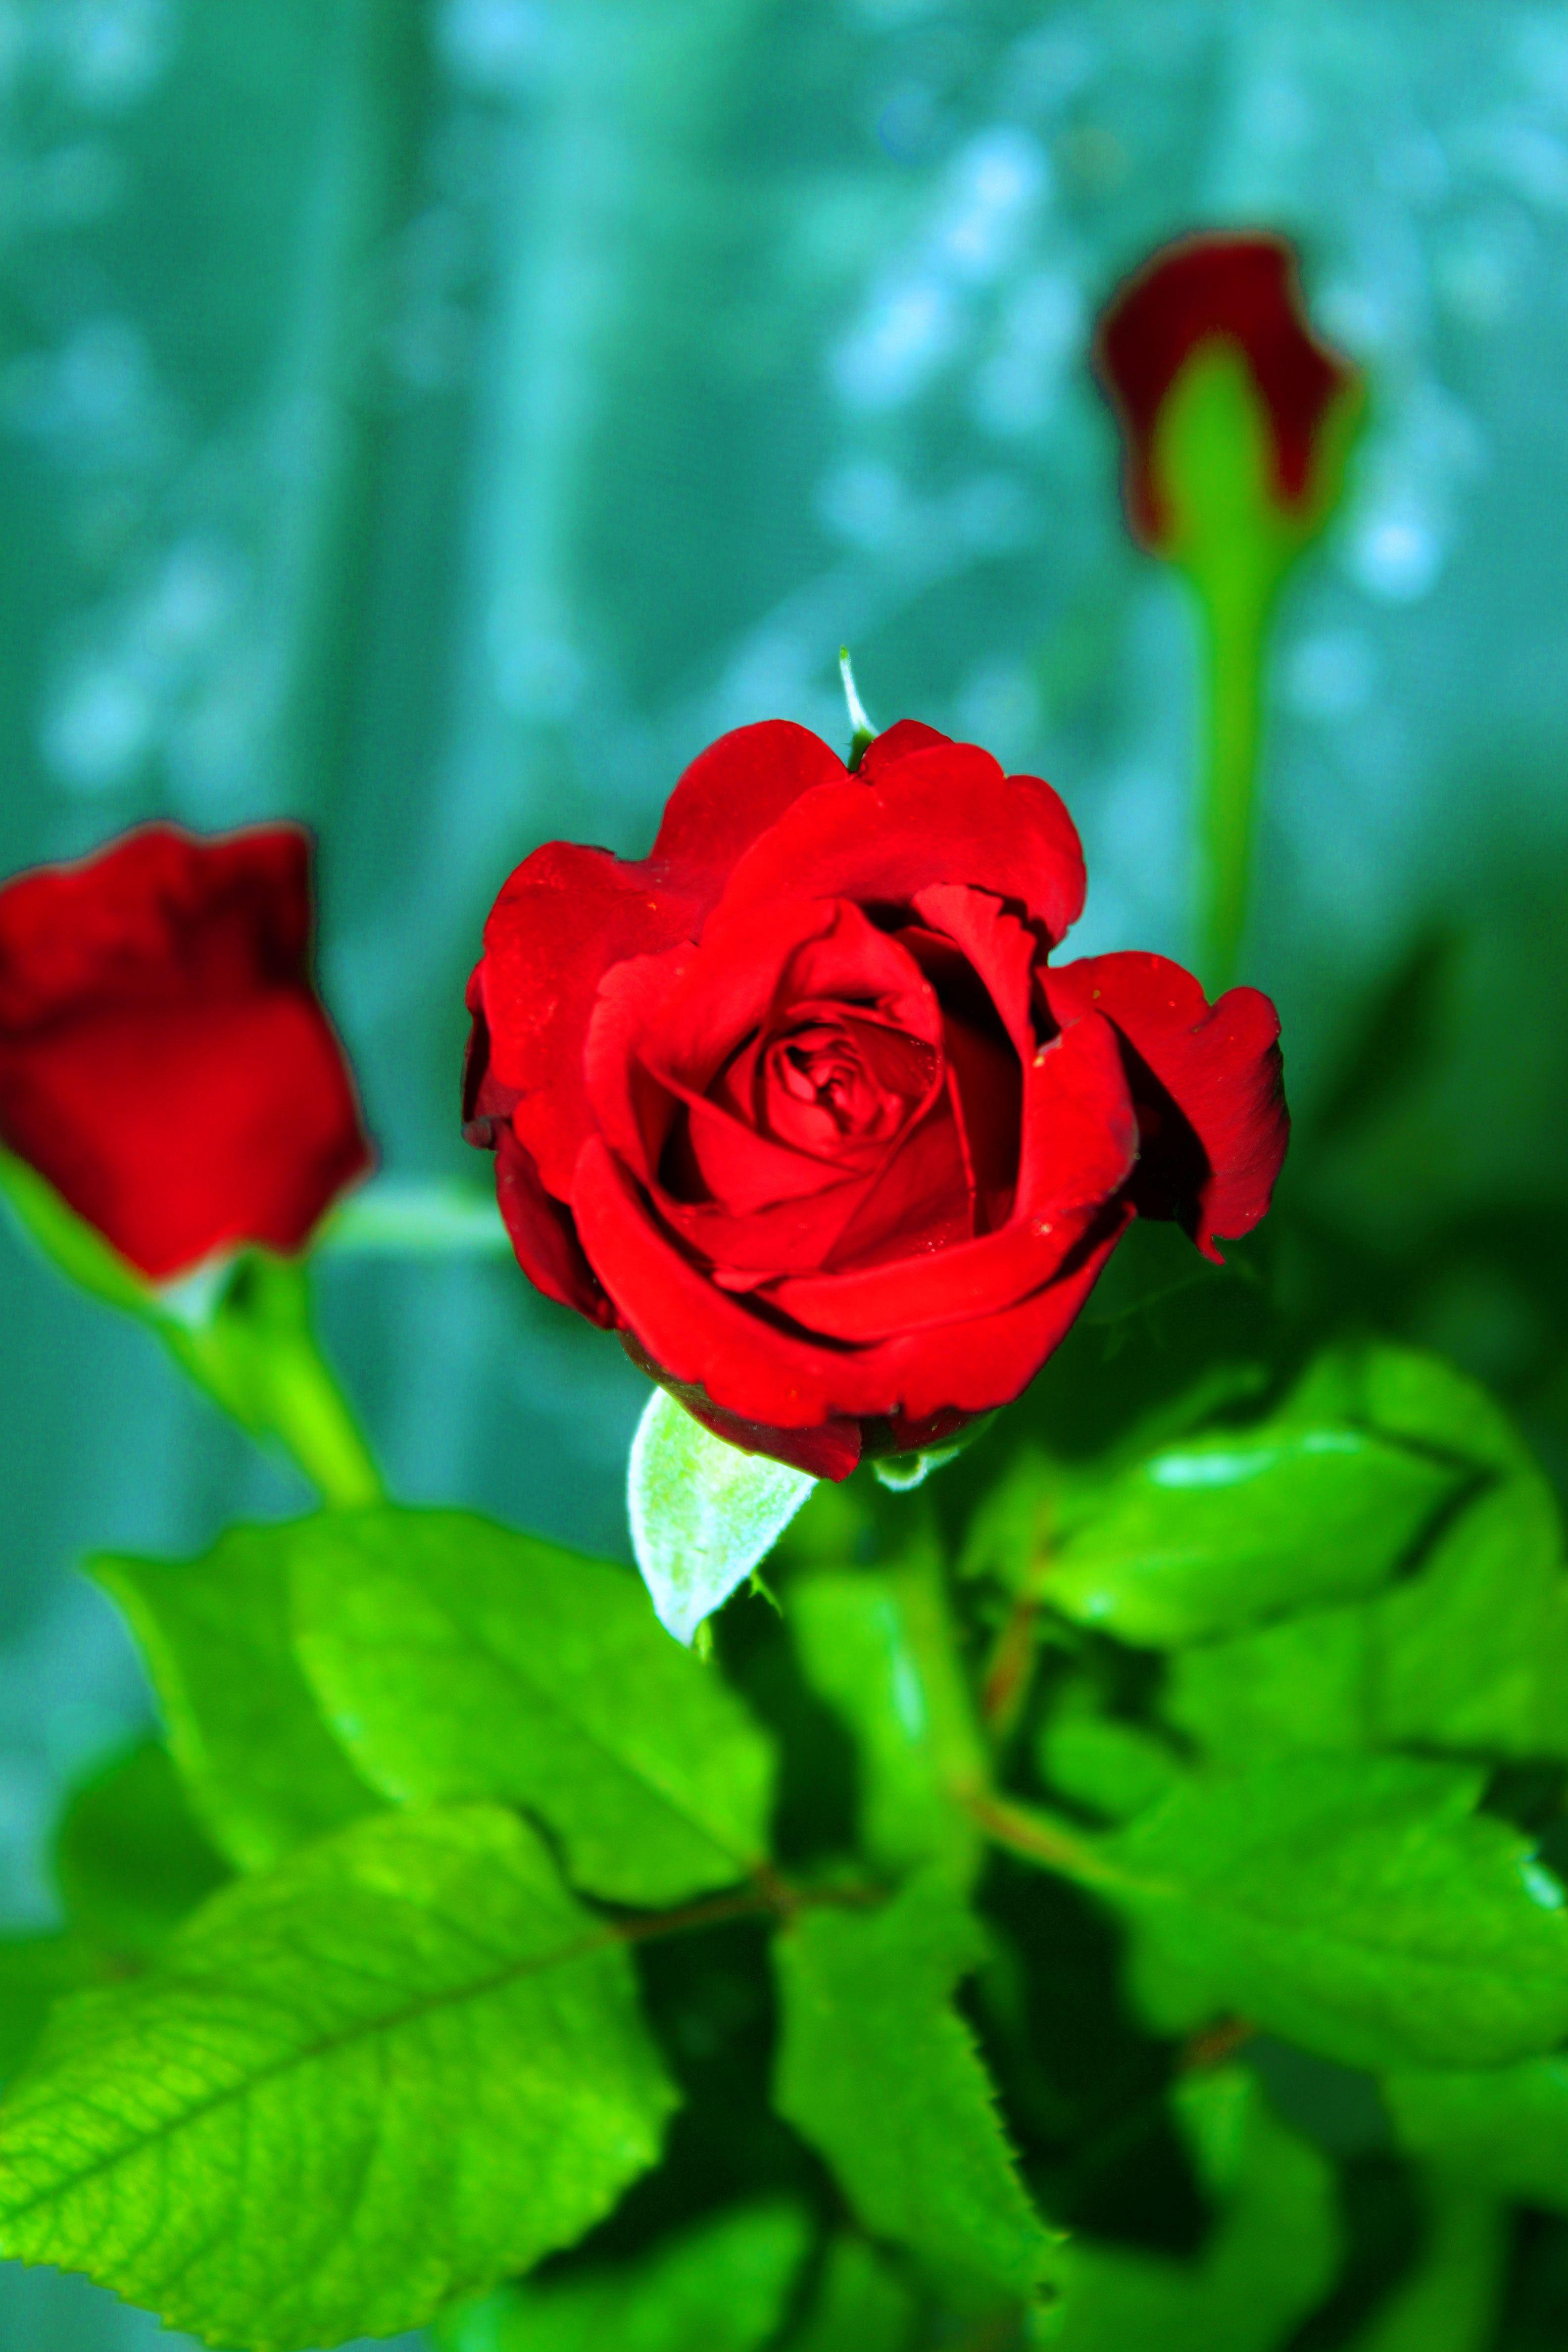 Shade of Red Roses Wallpaper, Shade of Red Roses Background